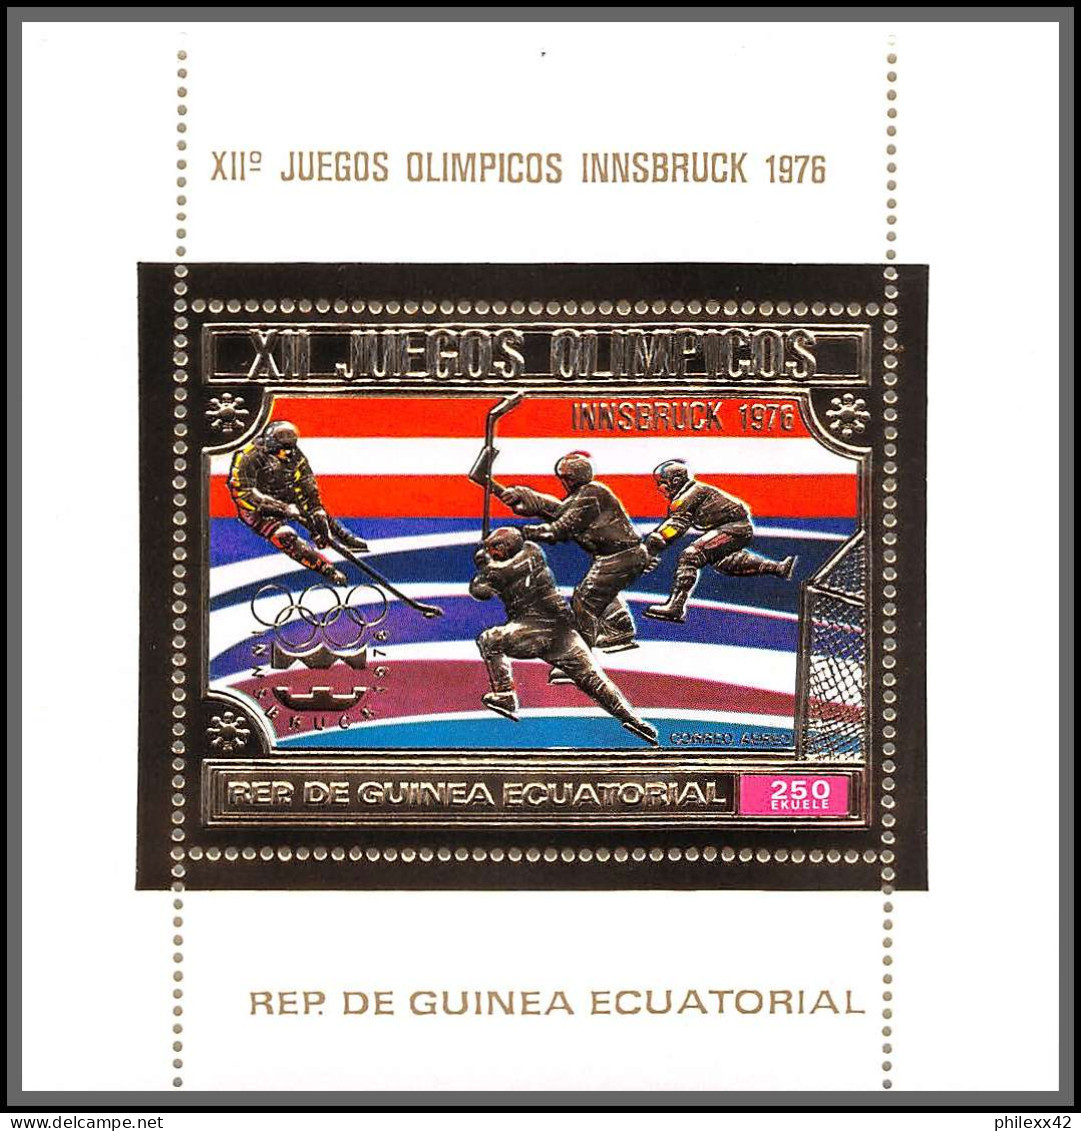 86345 Mi Bl 161 Innsbruck 1976 HOCKEY Jeux Olympiques (olympic Games) 1975 Guinée équatoriale Guinea OR Gold - Invierno 1976: Innsbruck